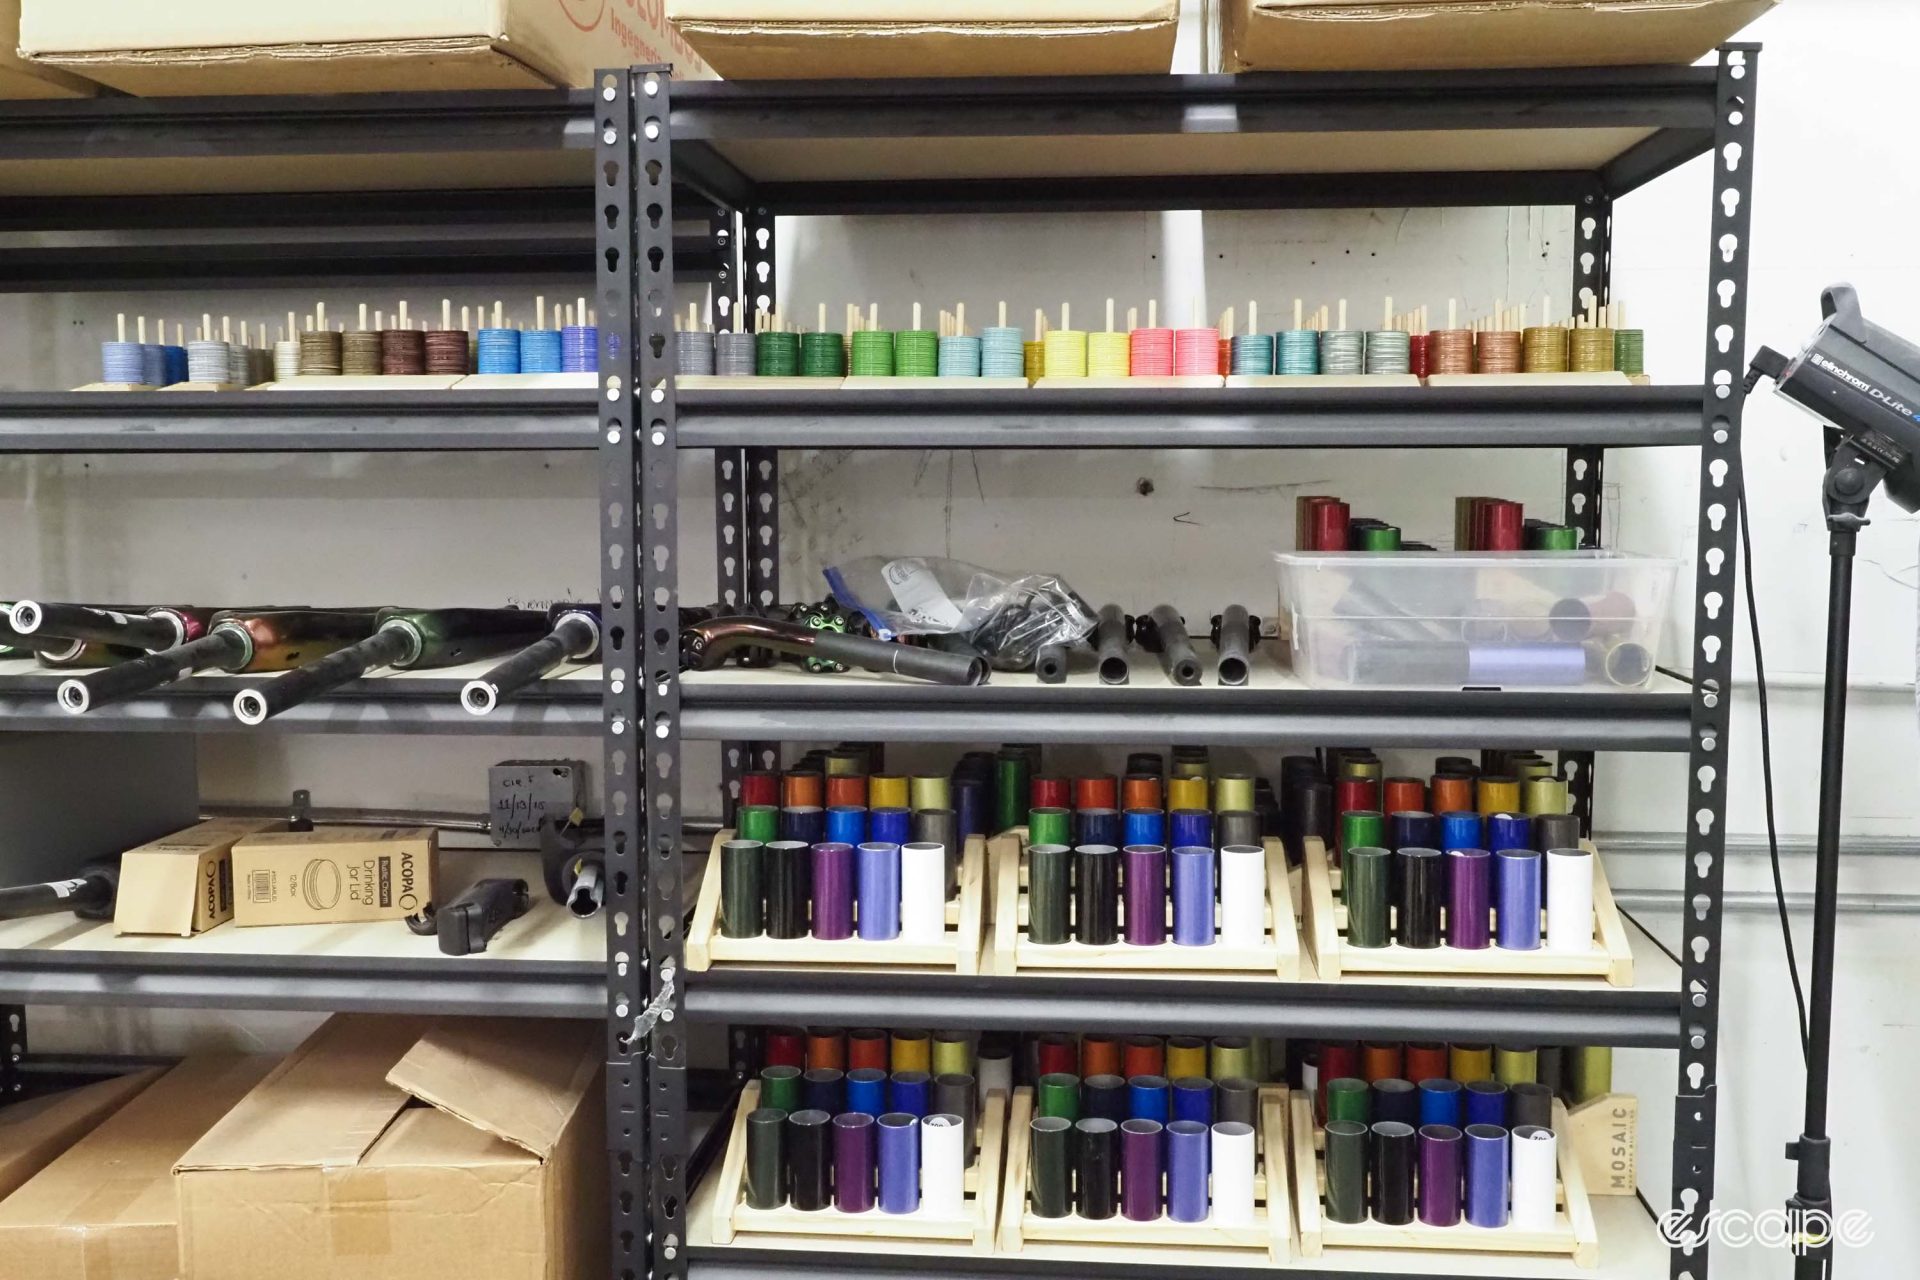 More paint samples are shown, including stacks of options that can ship to dealers to show customers.